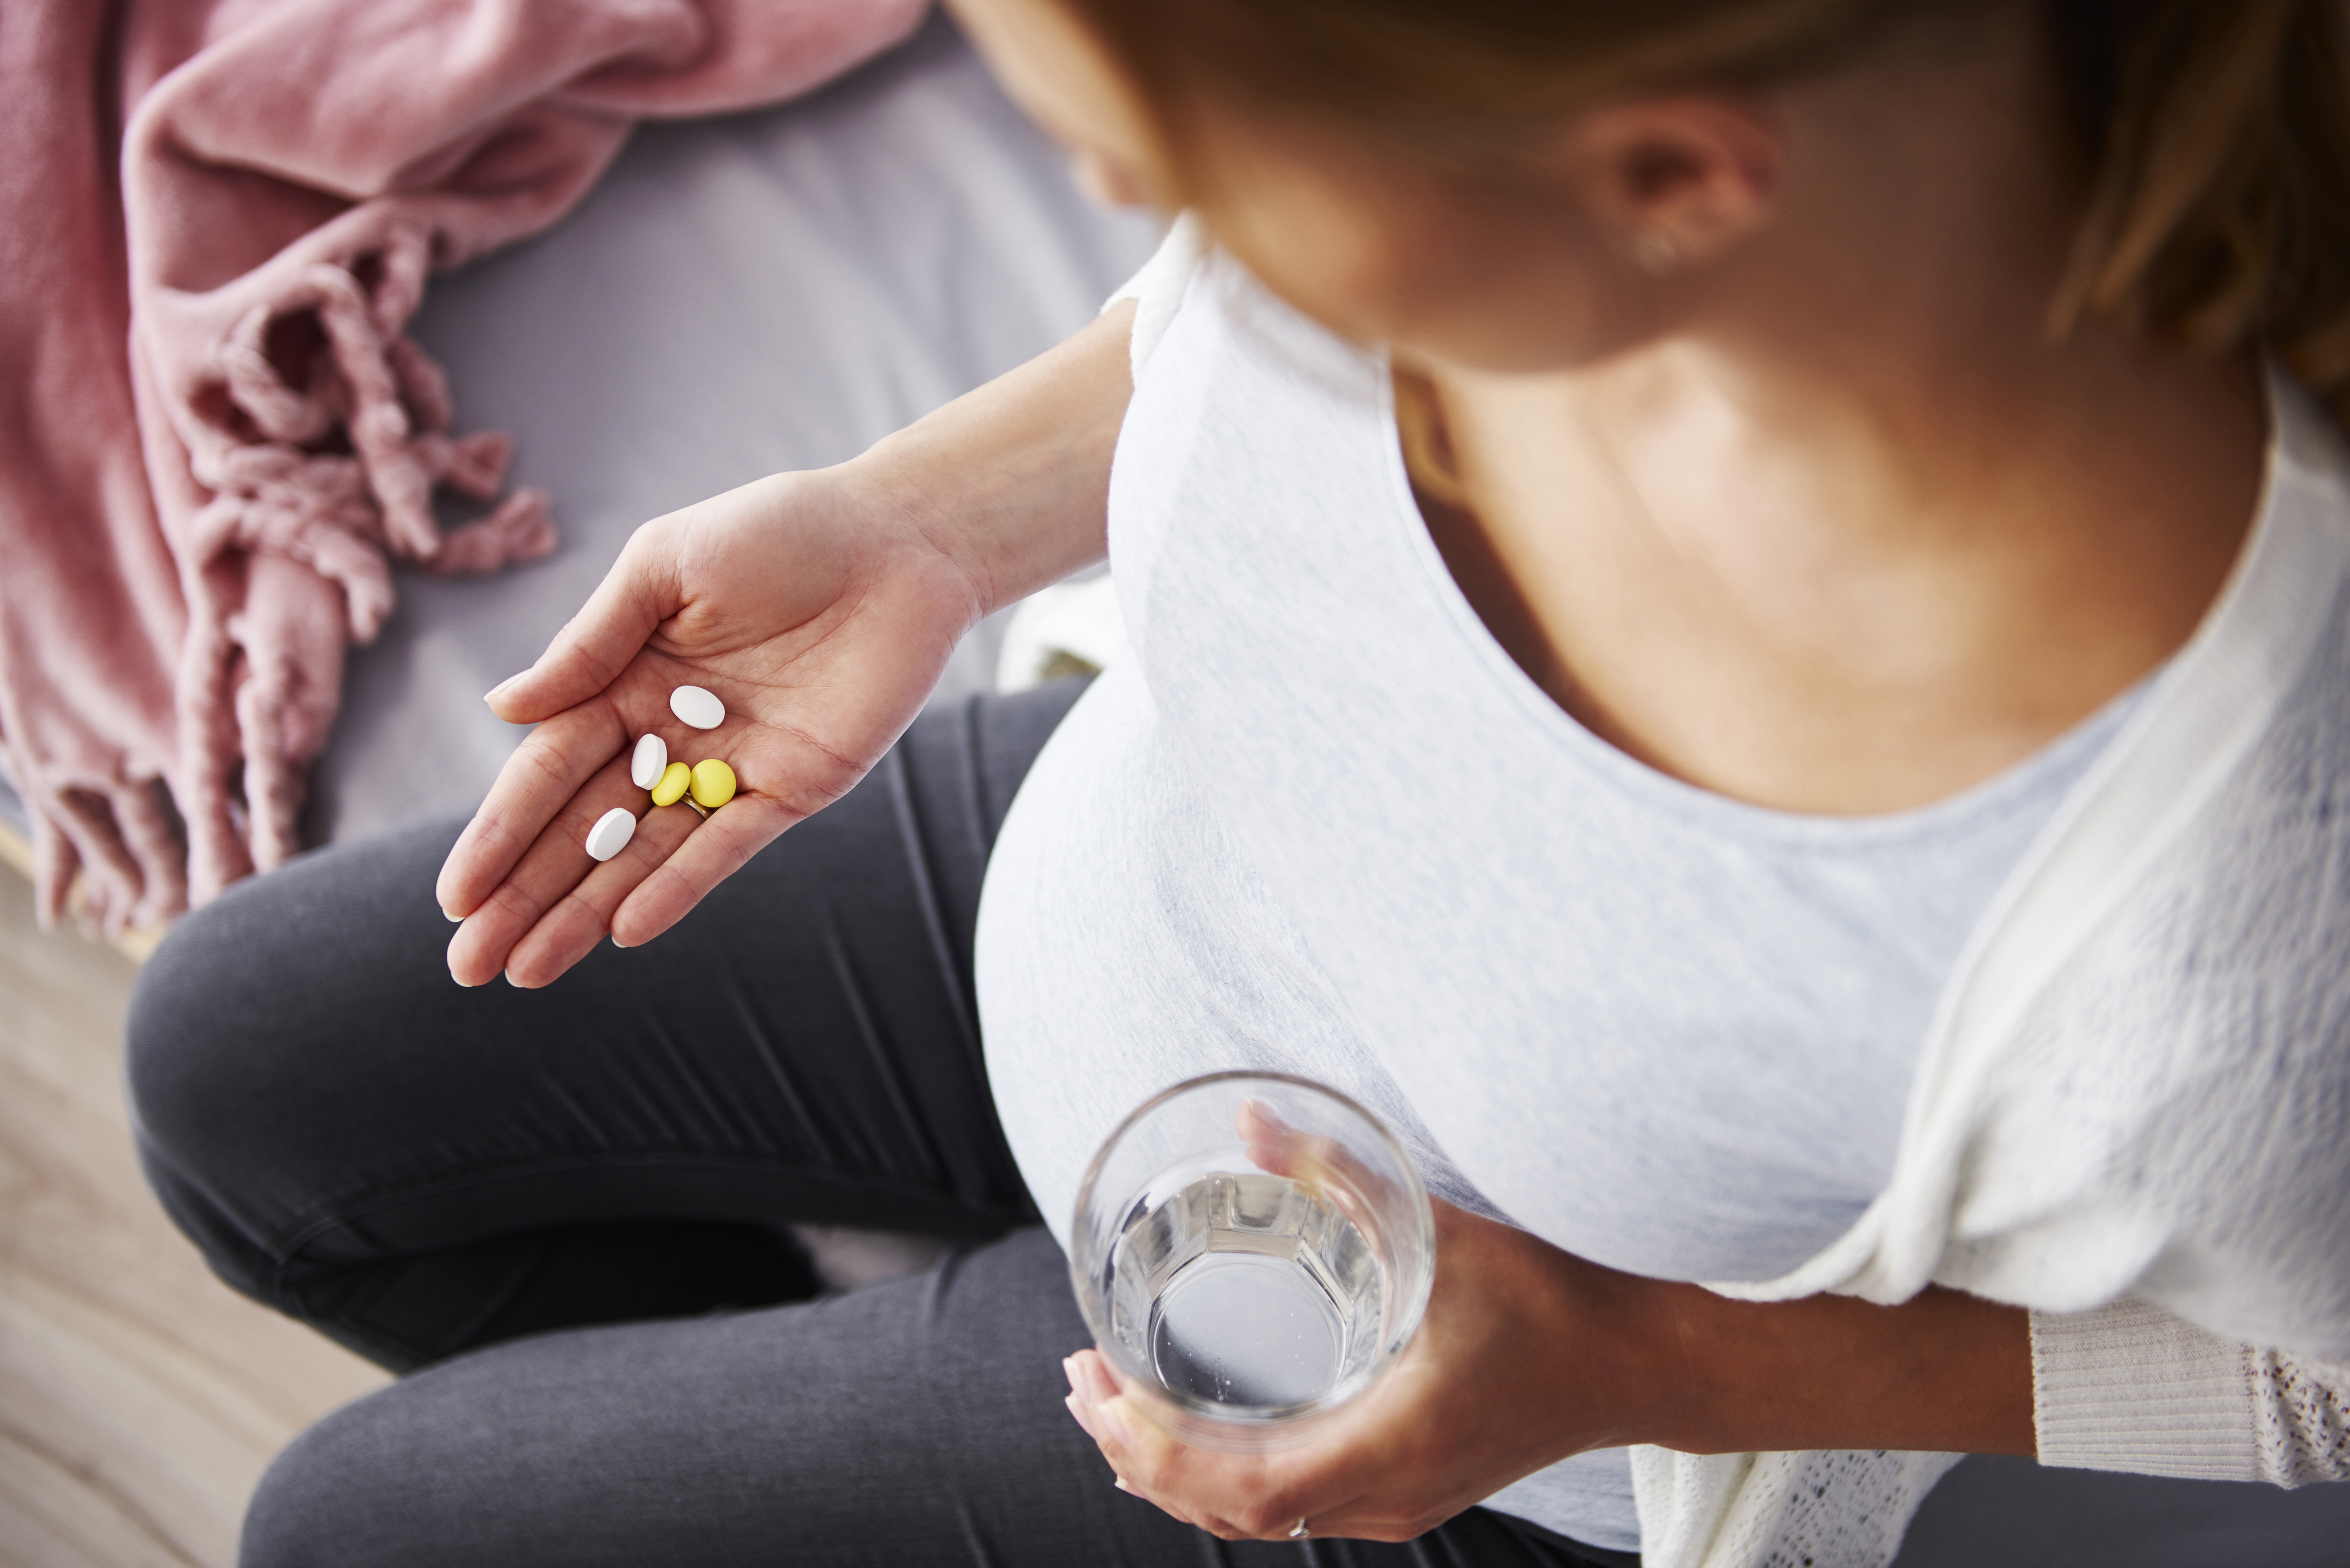 Can I Take A Fiber Supplement While Pregnant? 